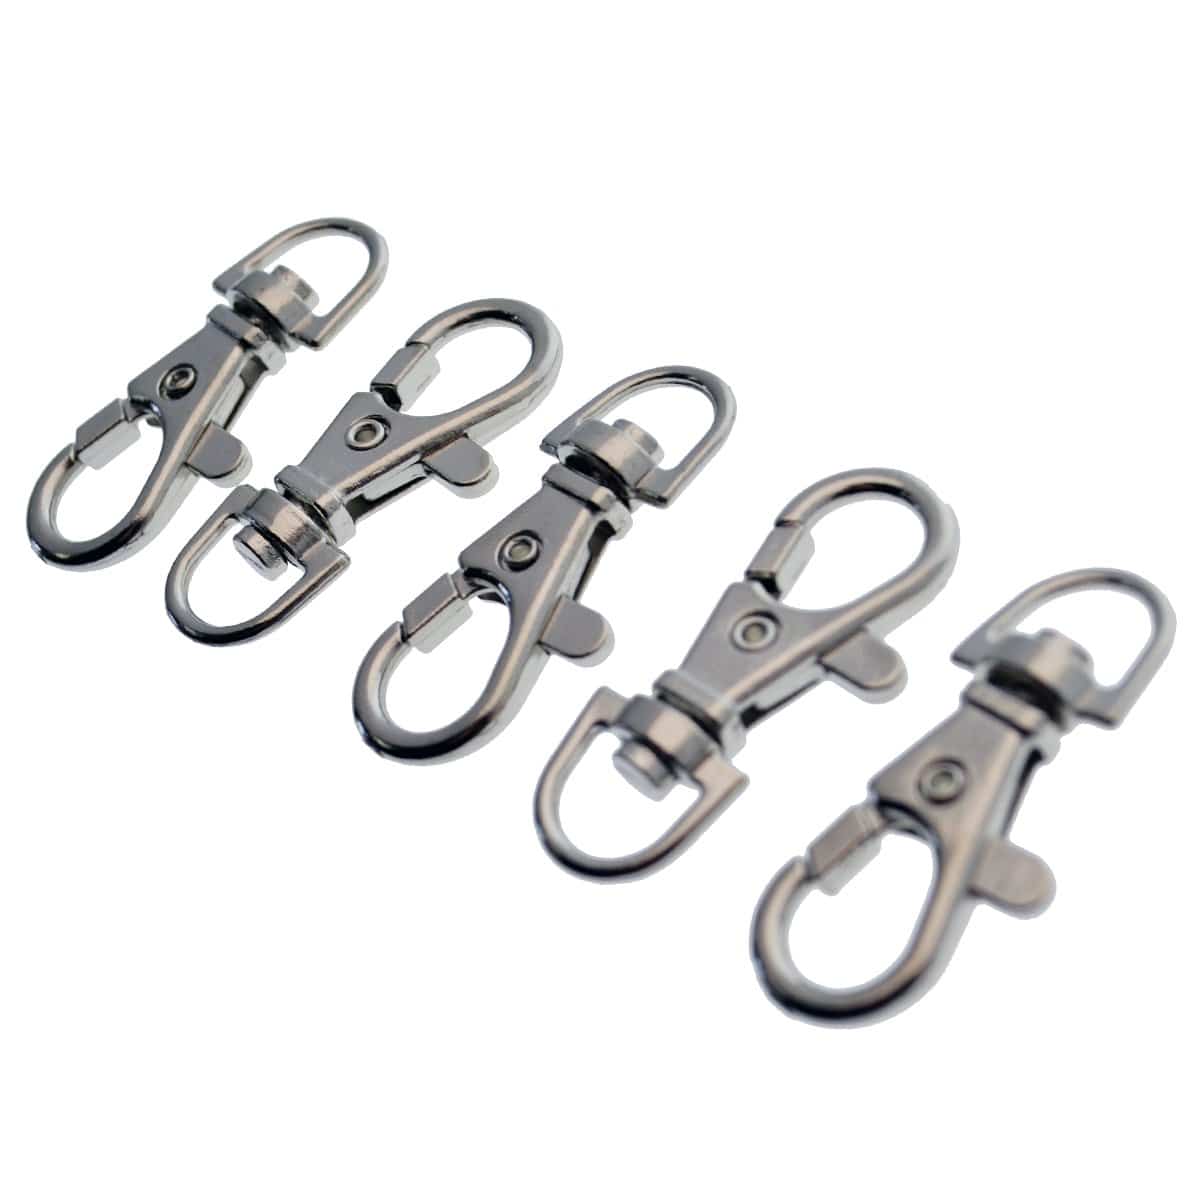 CRAFTMEMORE Lobster Claw Clasps Trigger Snap Hooks 1 1/4 x 1/2 Landyard  Swivel Clip 10 Pack HO1 (Silver)